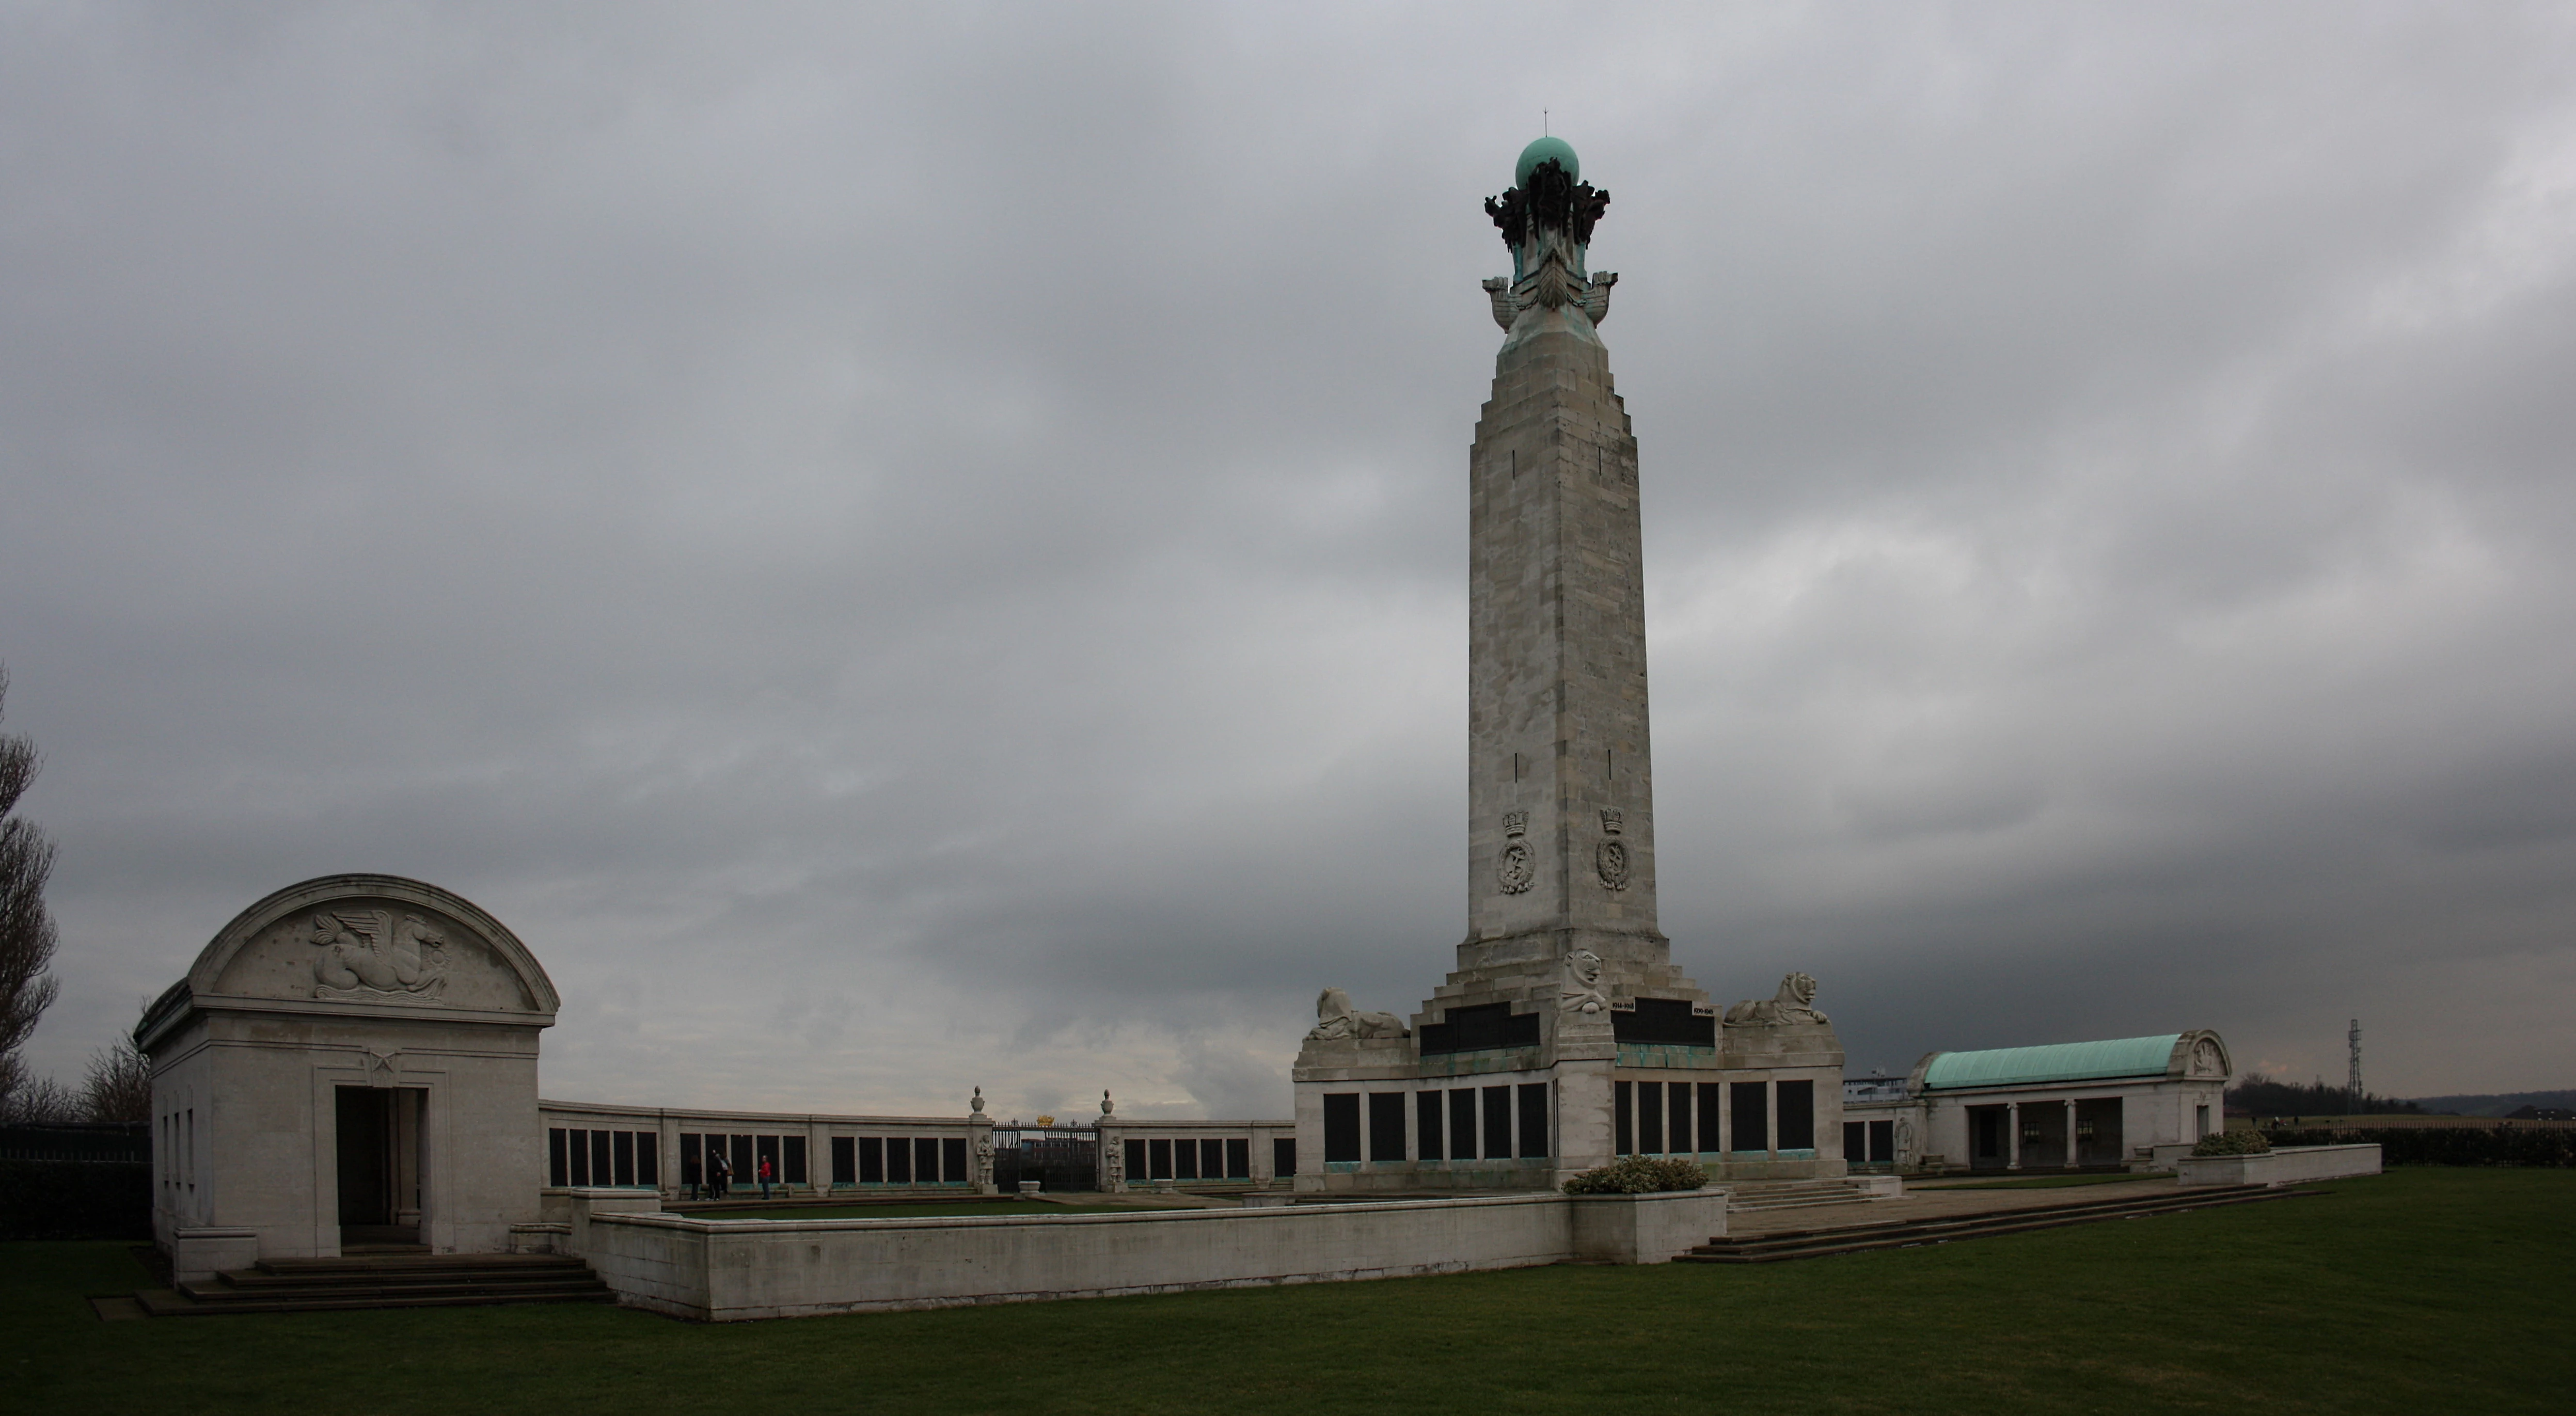 The Royal Naval War Memorial viewed from the seaward (Chatham) side